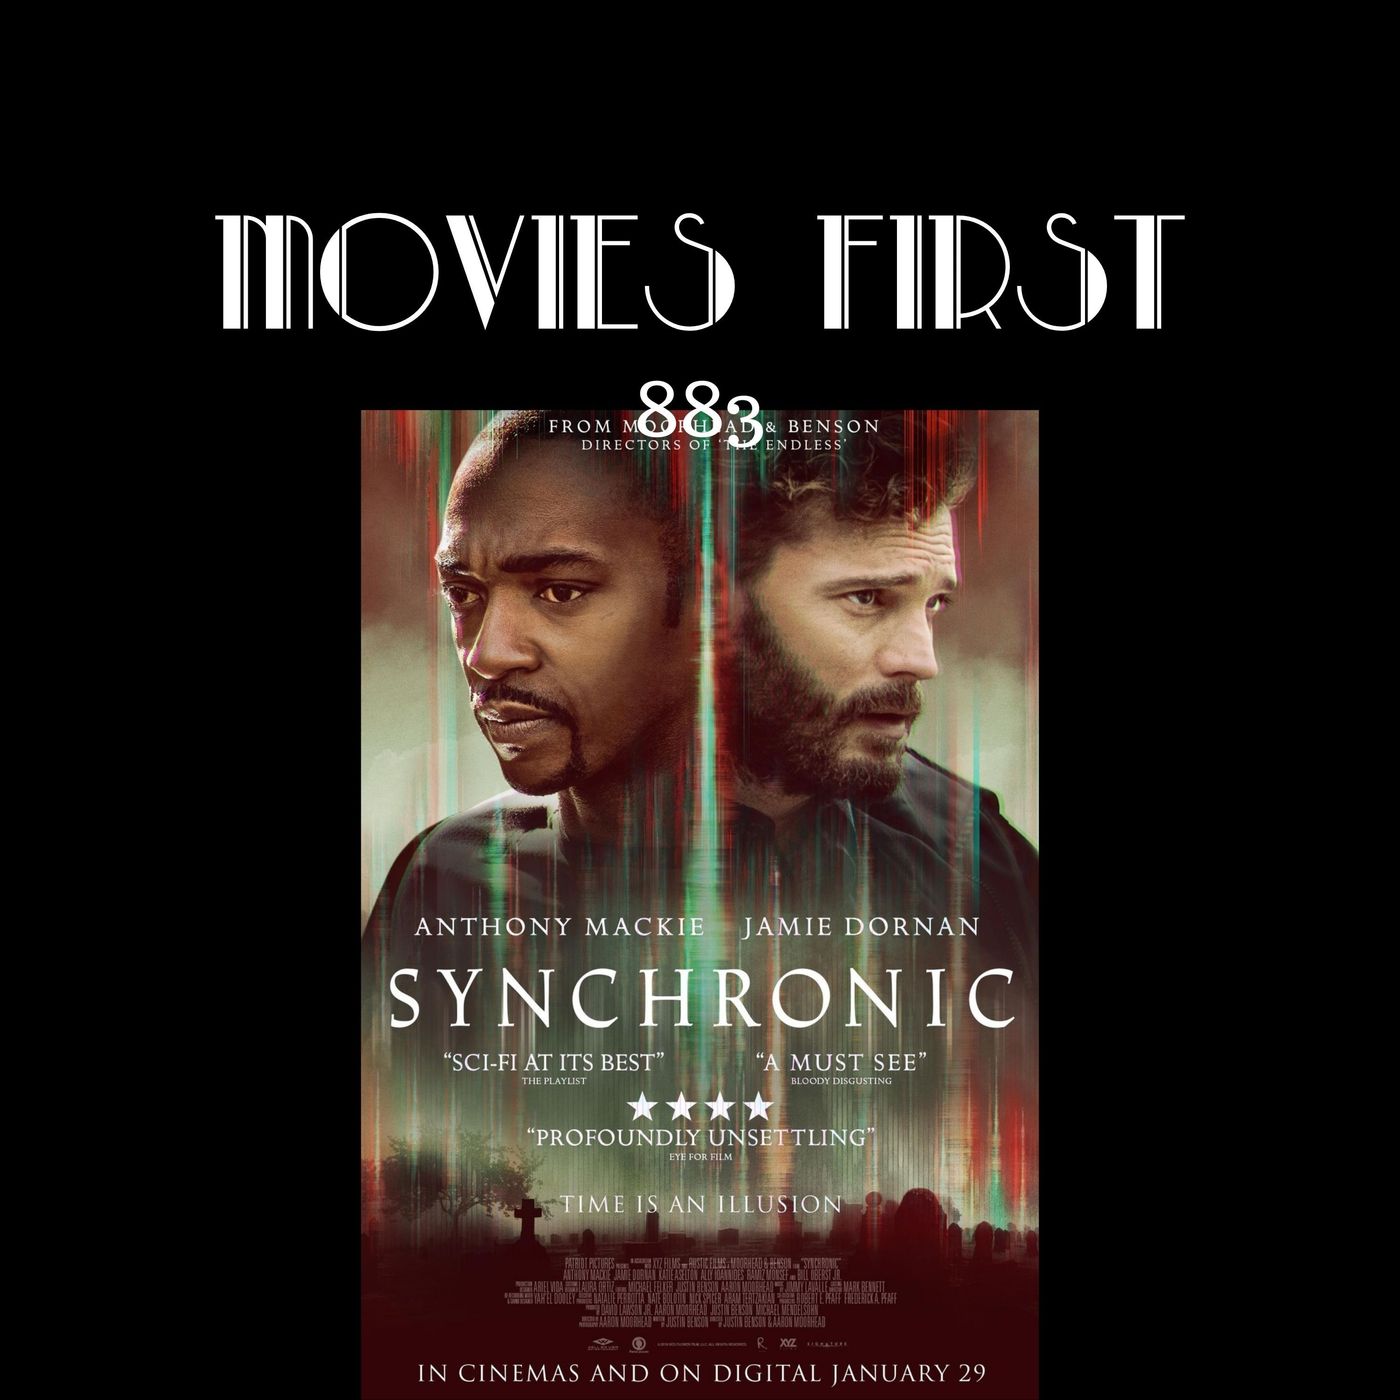 Synchronic (Drama, Horror, Sci-Fi) (the @MoviesFirst review)